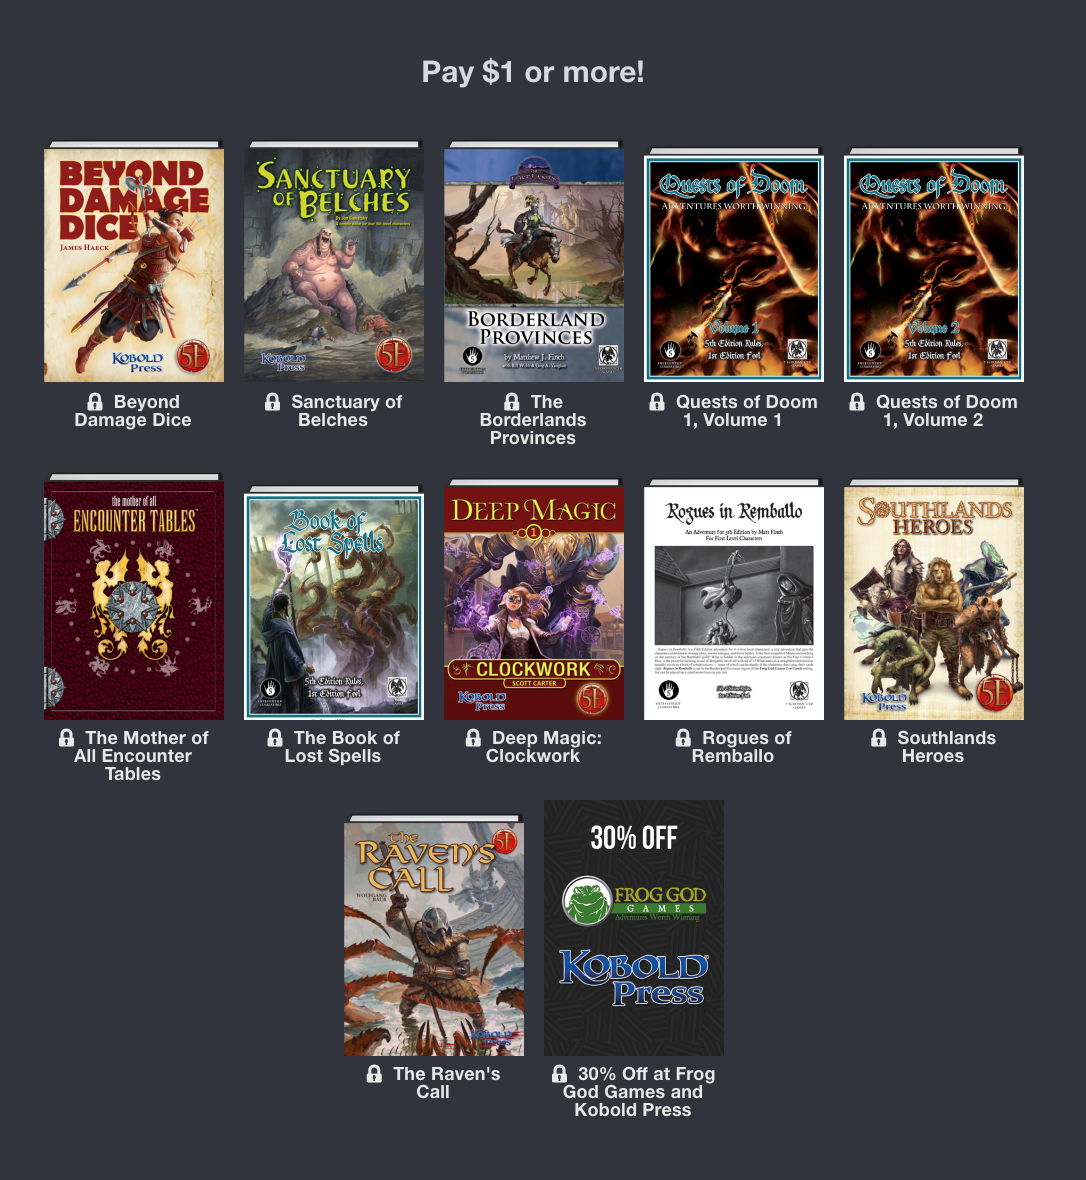 Pay what you want for The Humble RPG Book Bundle: Dungeons, Monsters &  Dragons 5E by Frog God Games & Kobold Press - Armchair Arcade